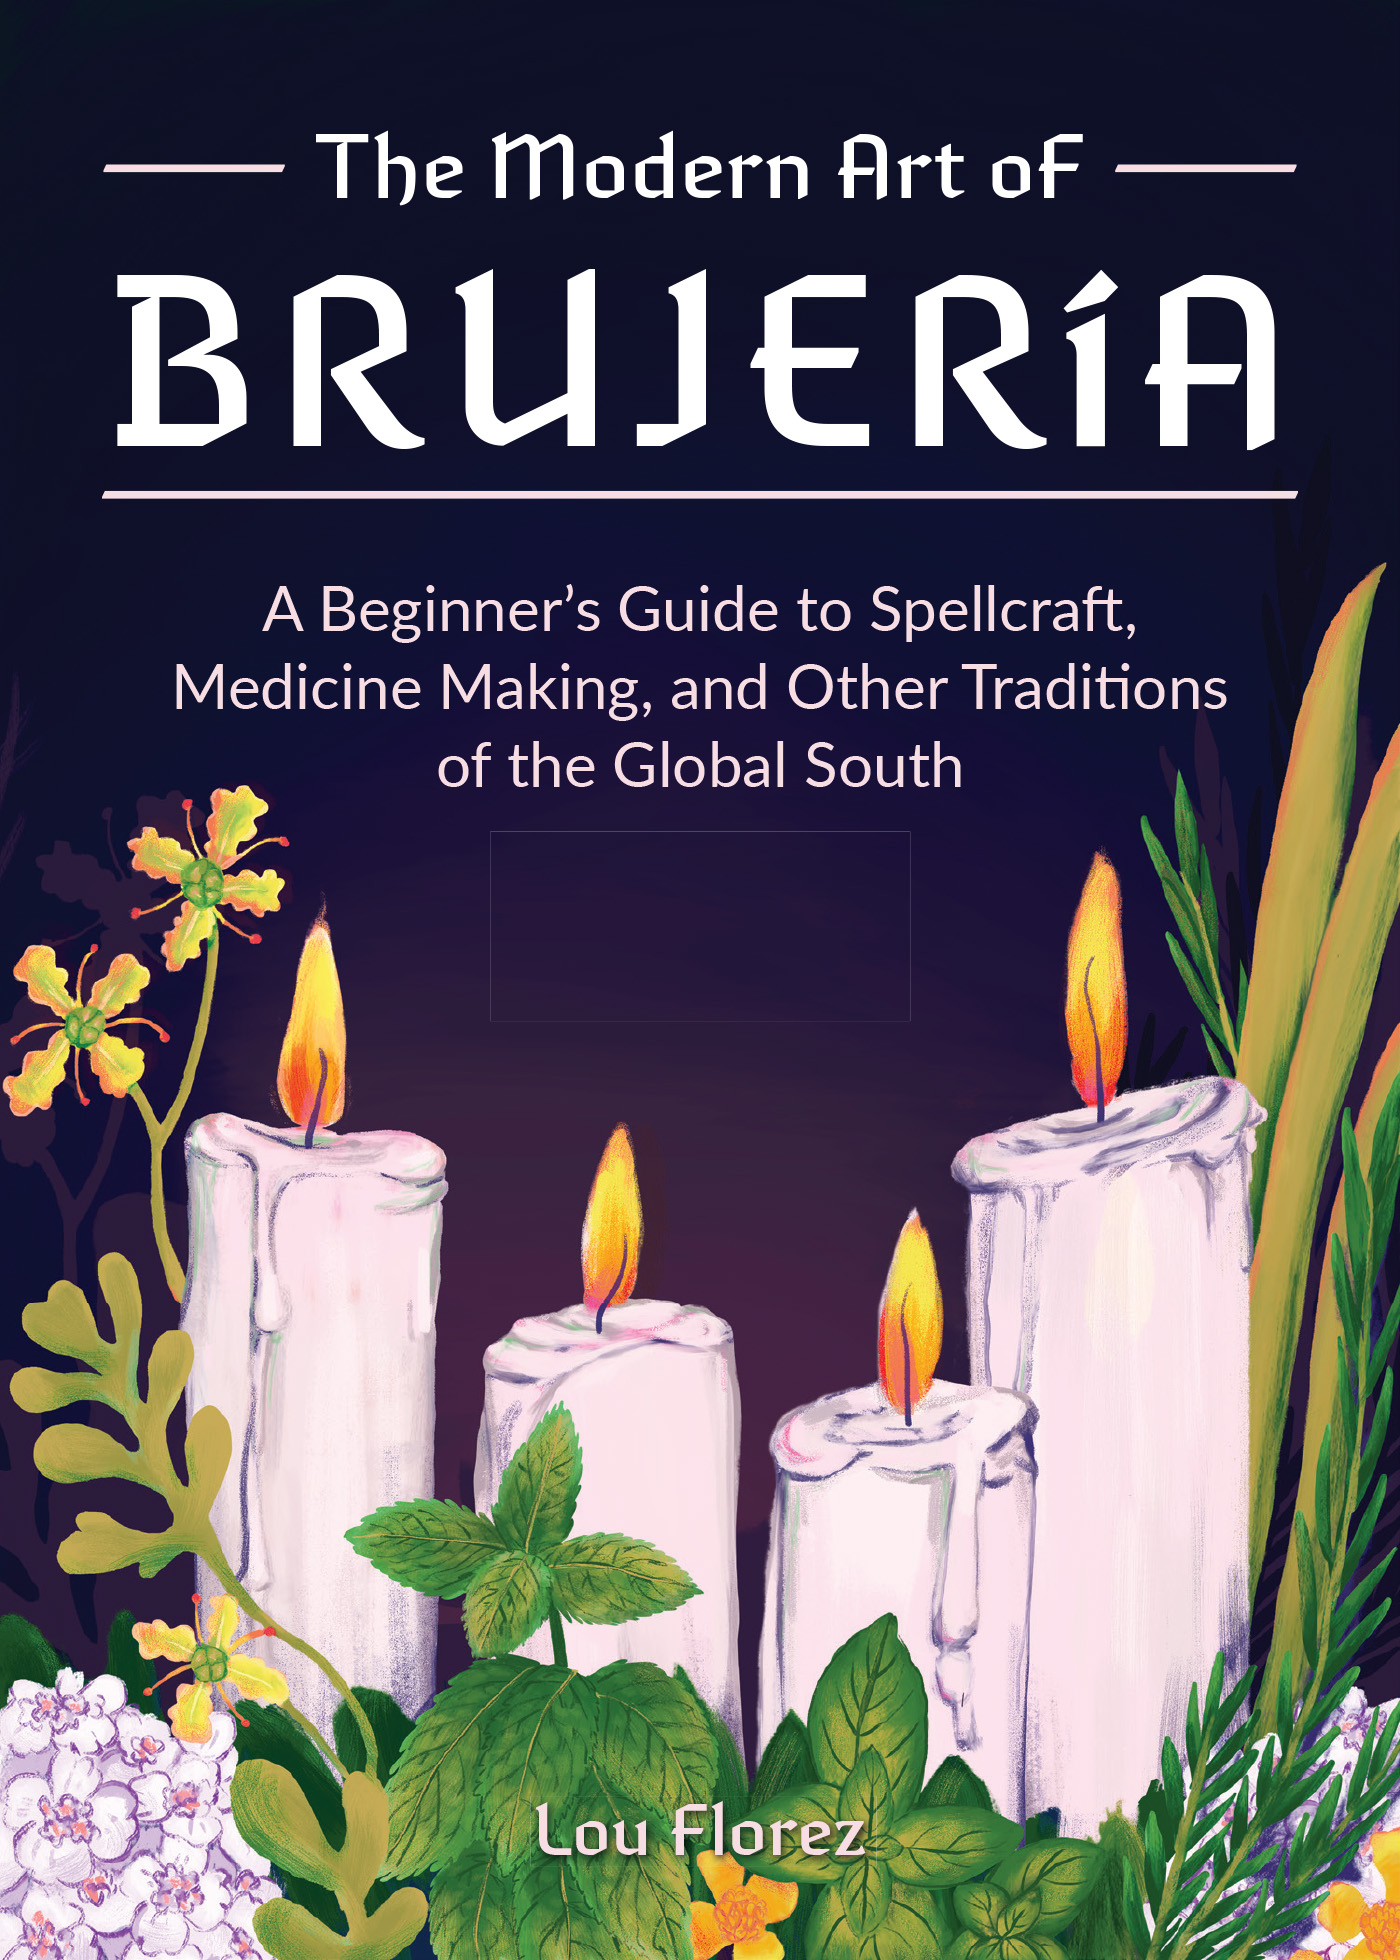 Modern Art of Brujeria-front.indd